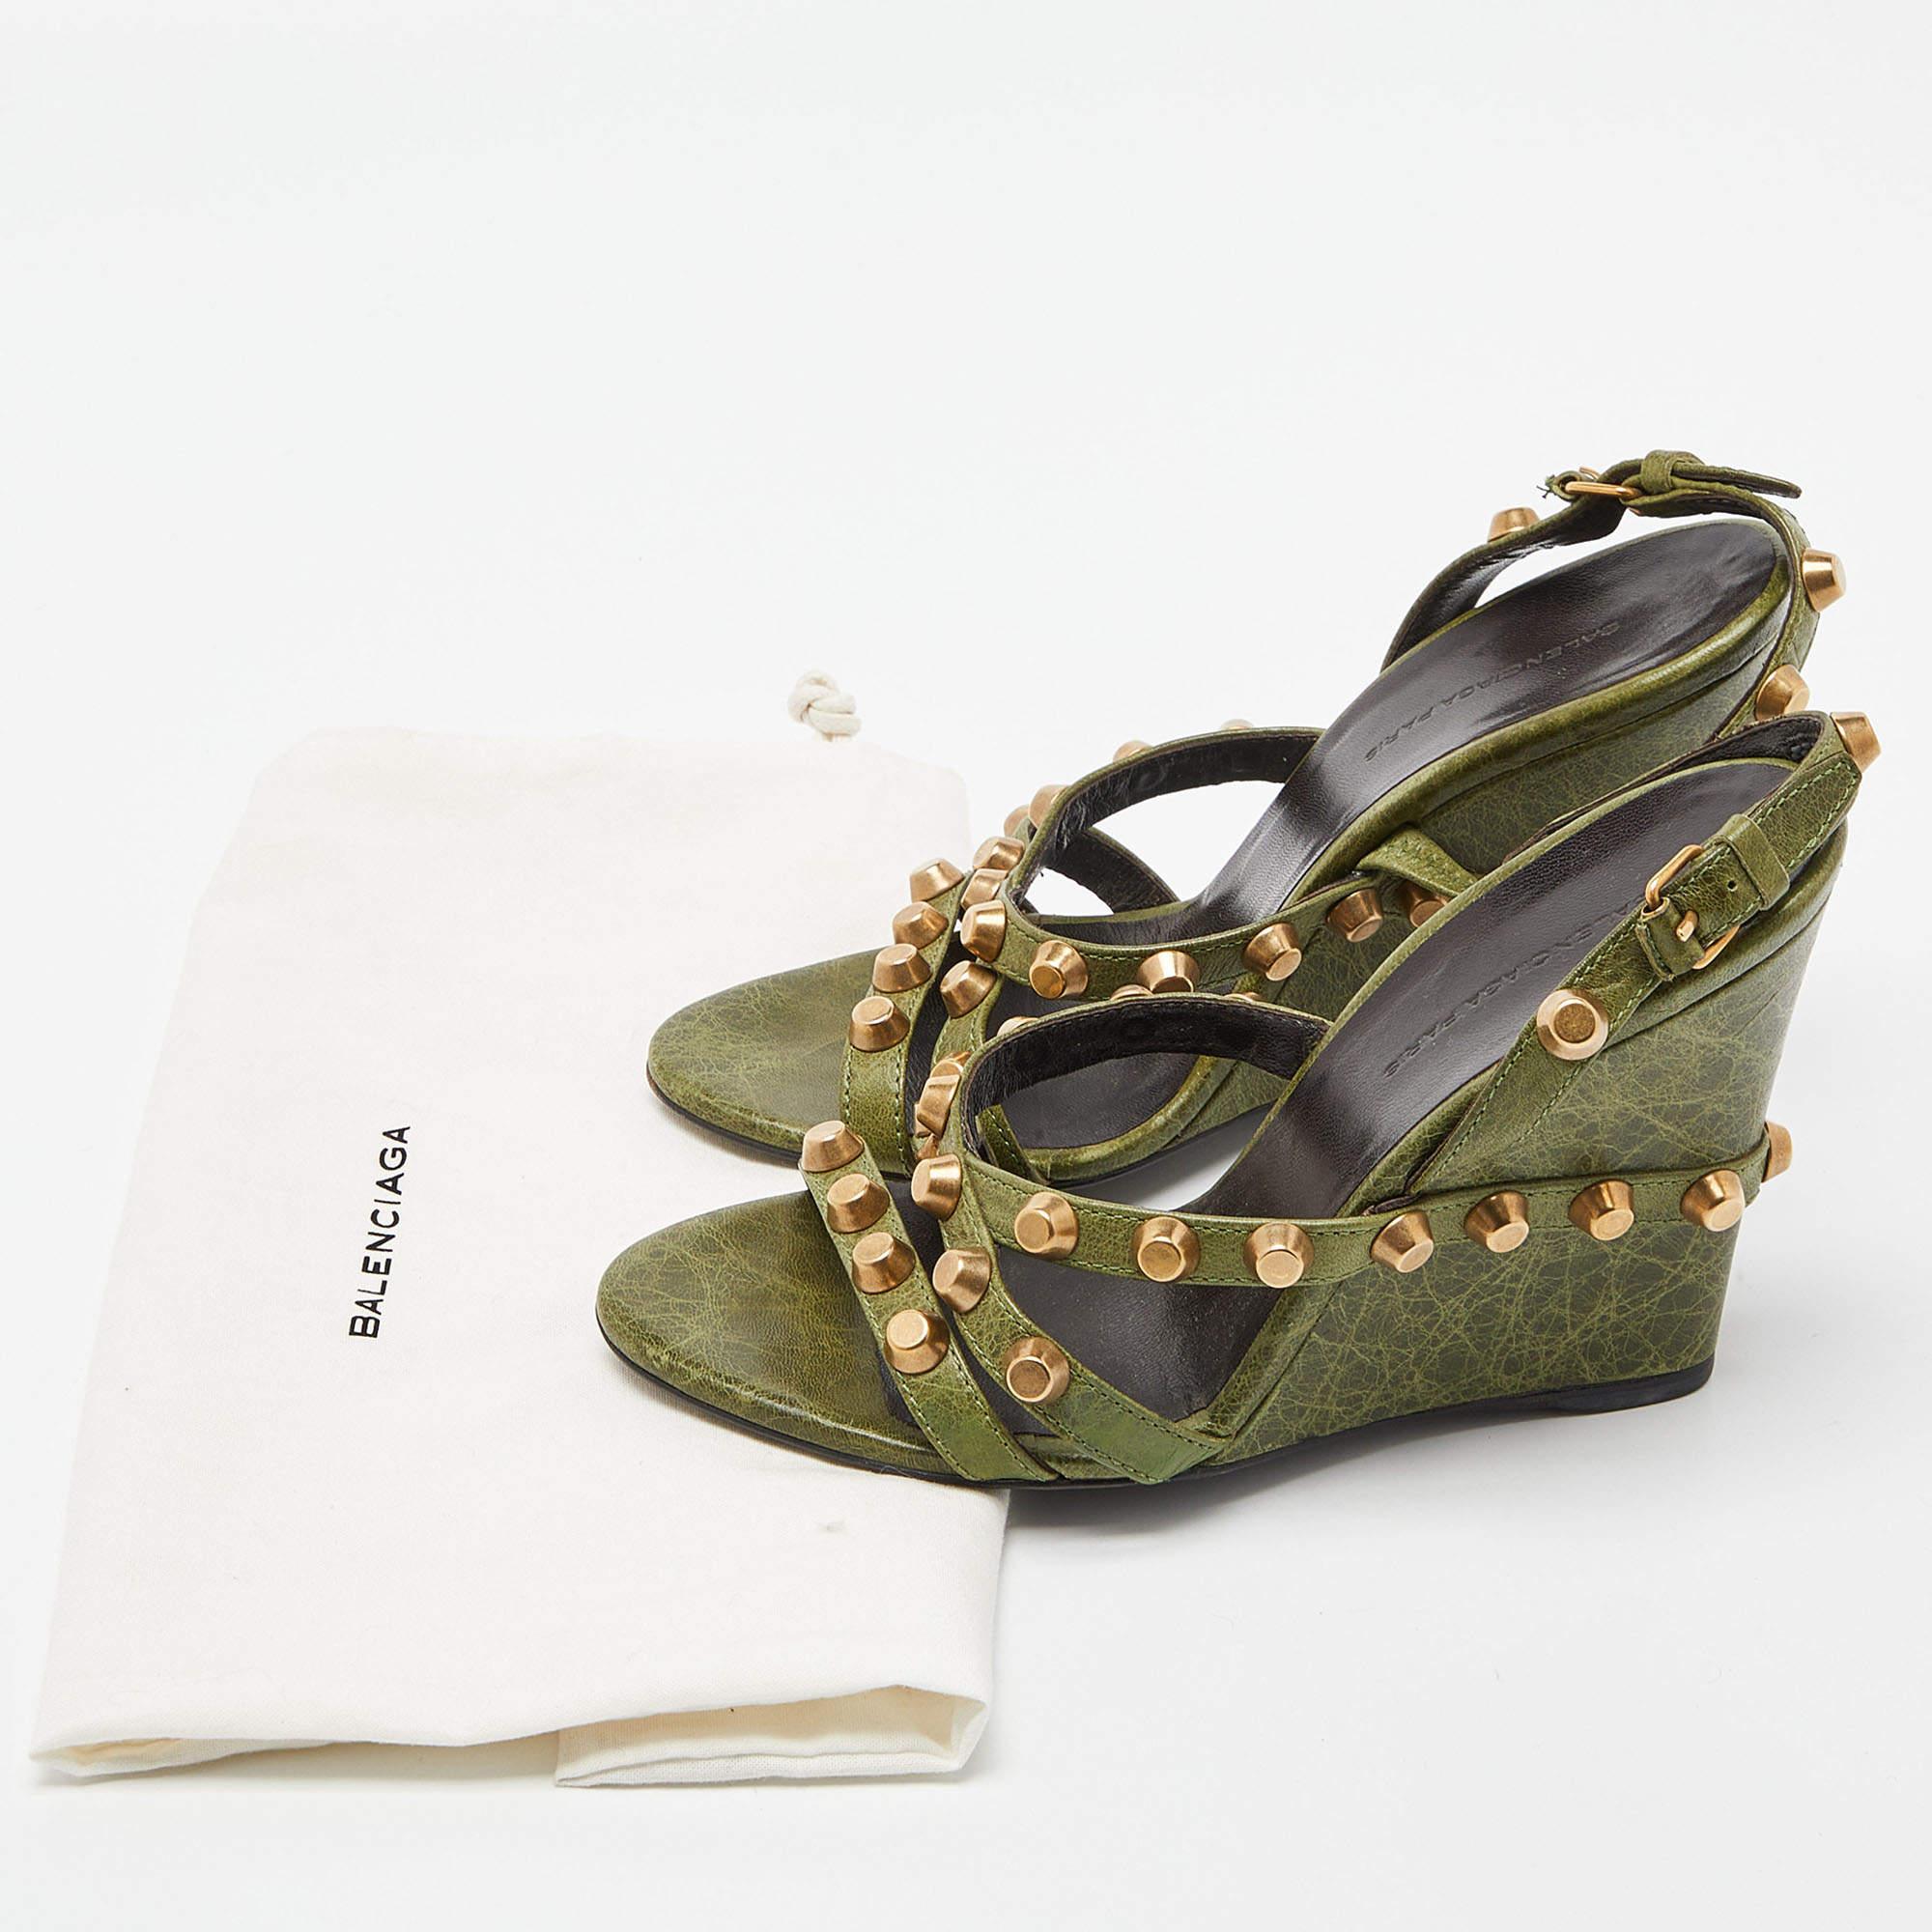 Balenciaga Green Leather Arena Studded Wedge Sandals Size 36.5 4